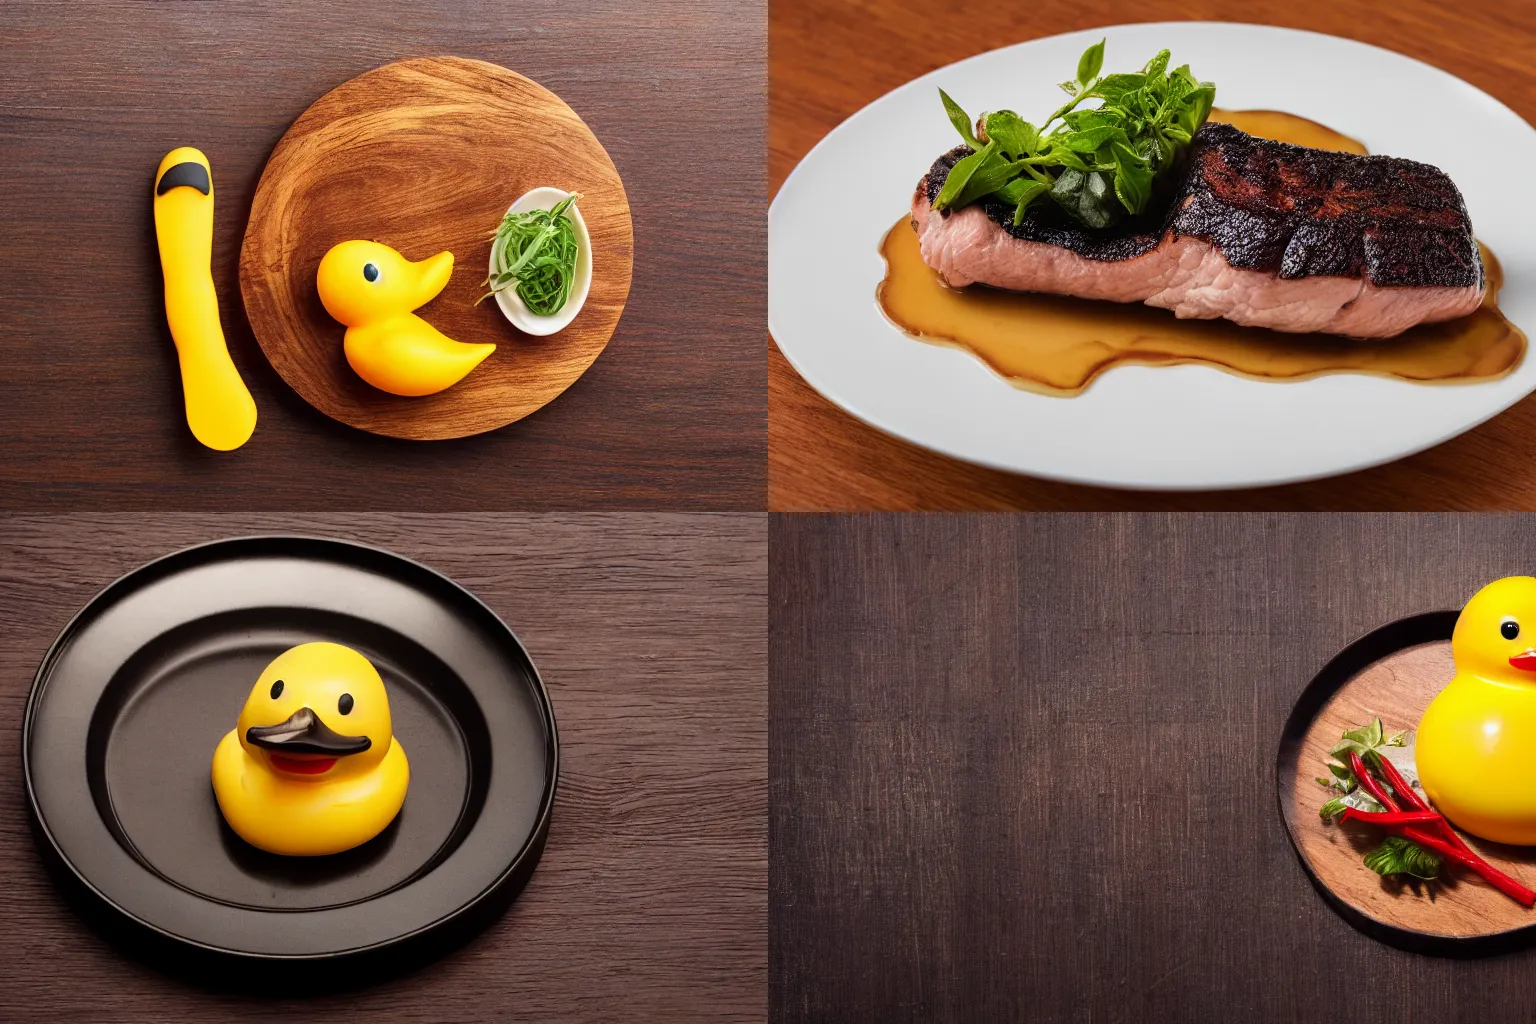 rubber duck filet served on wood, michelin star | Stable Diffusion ...